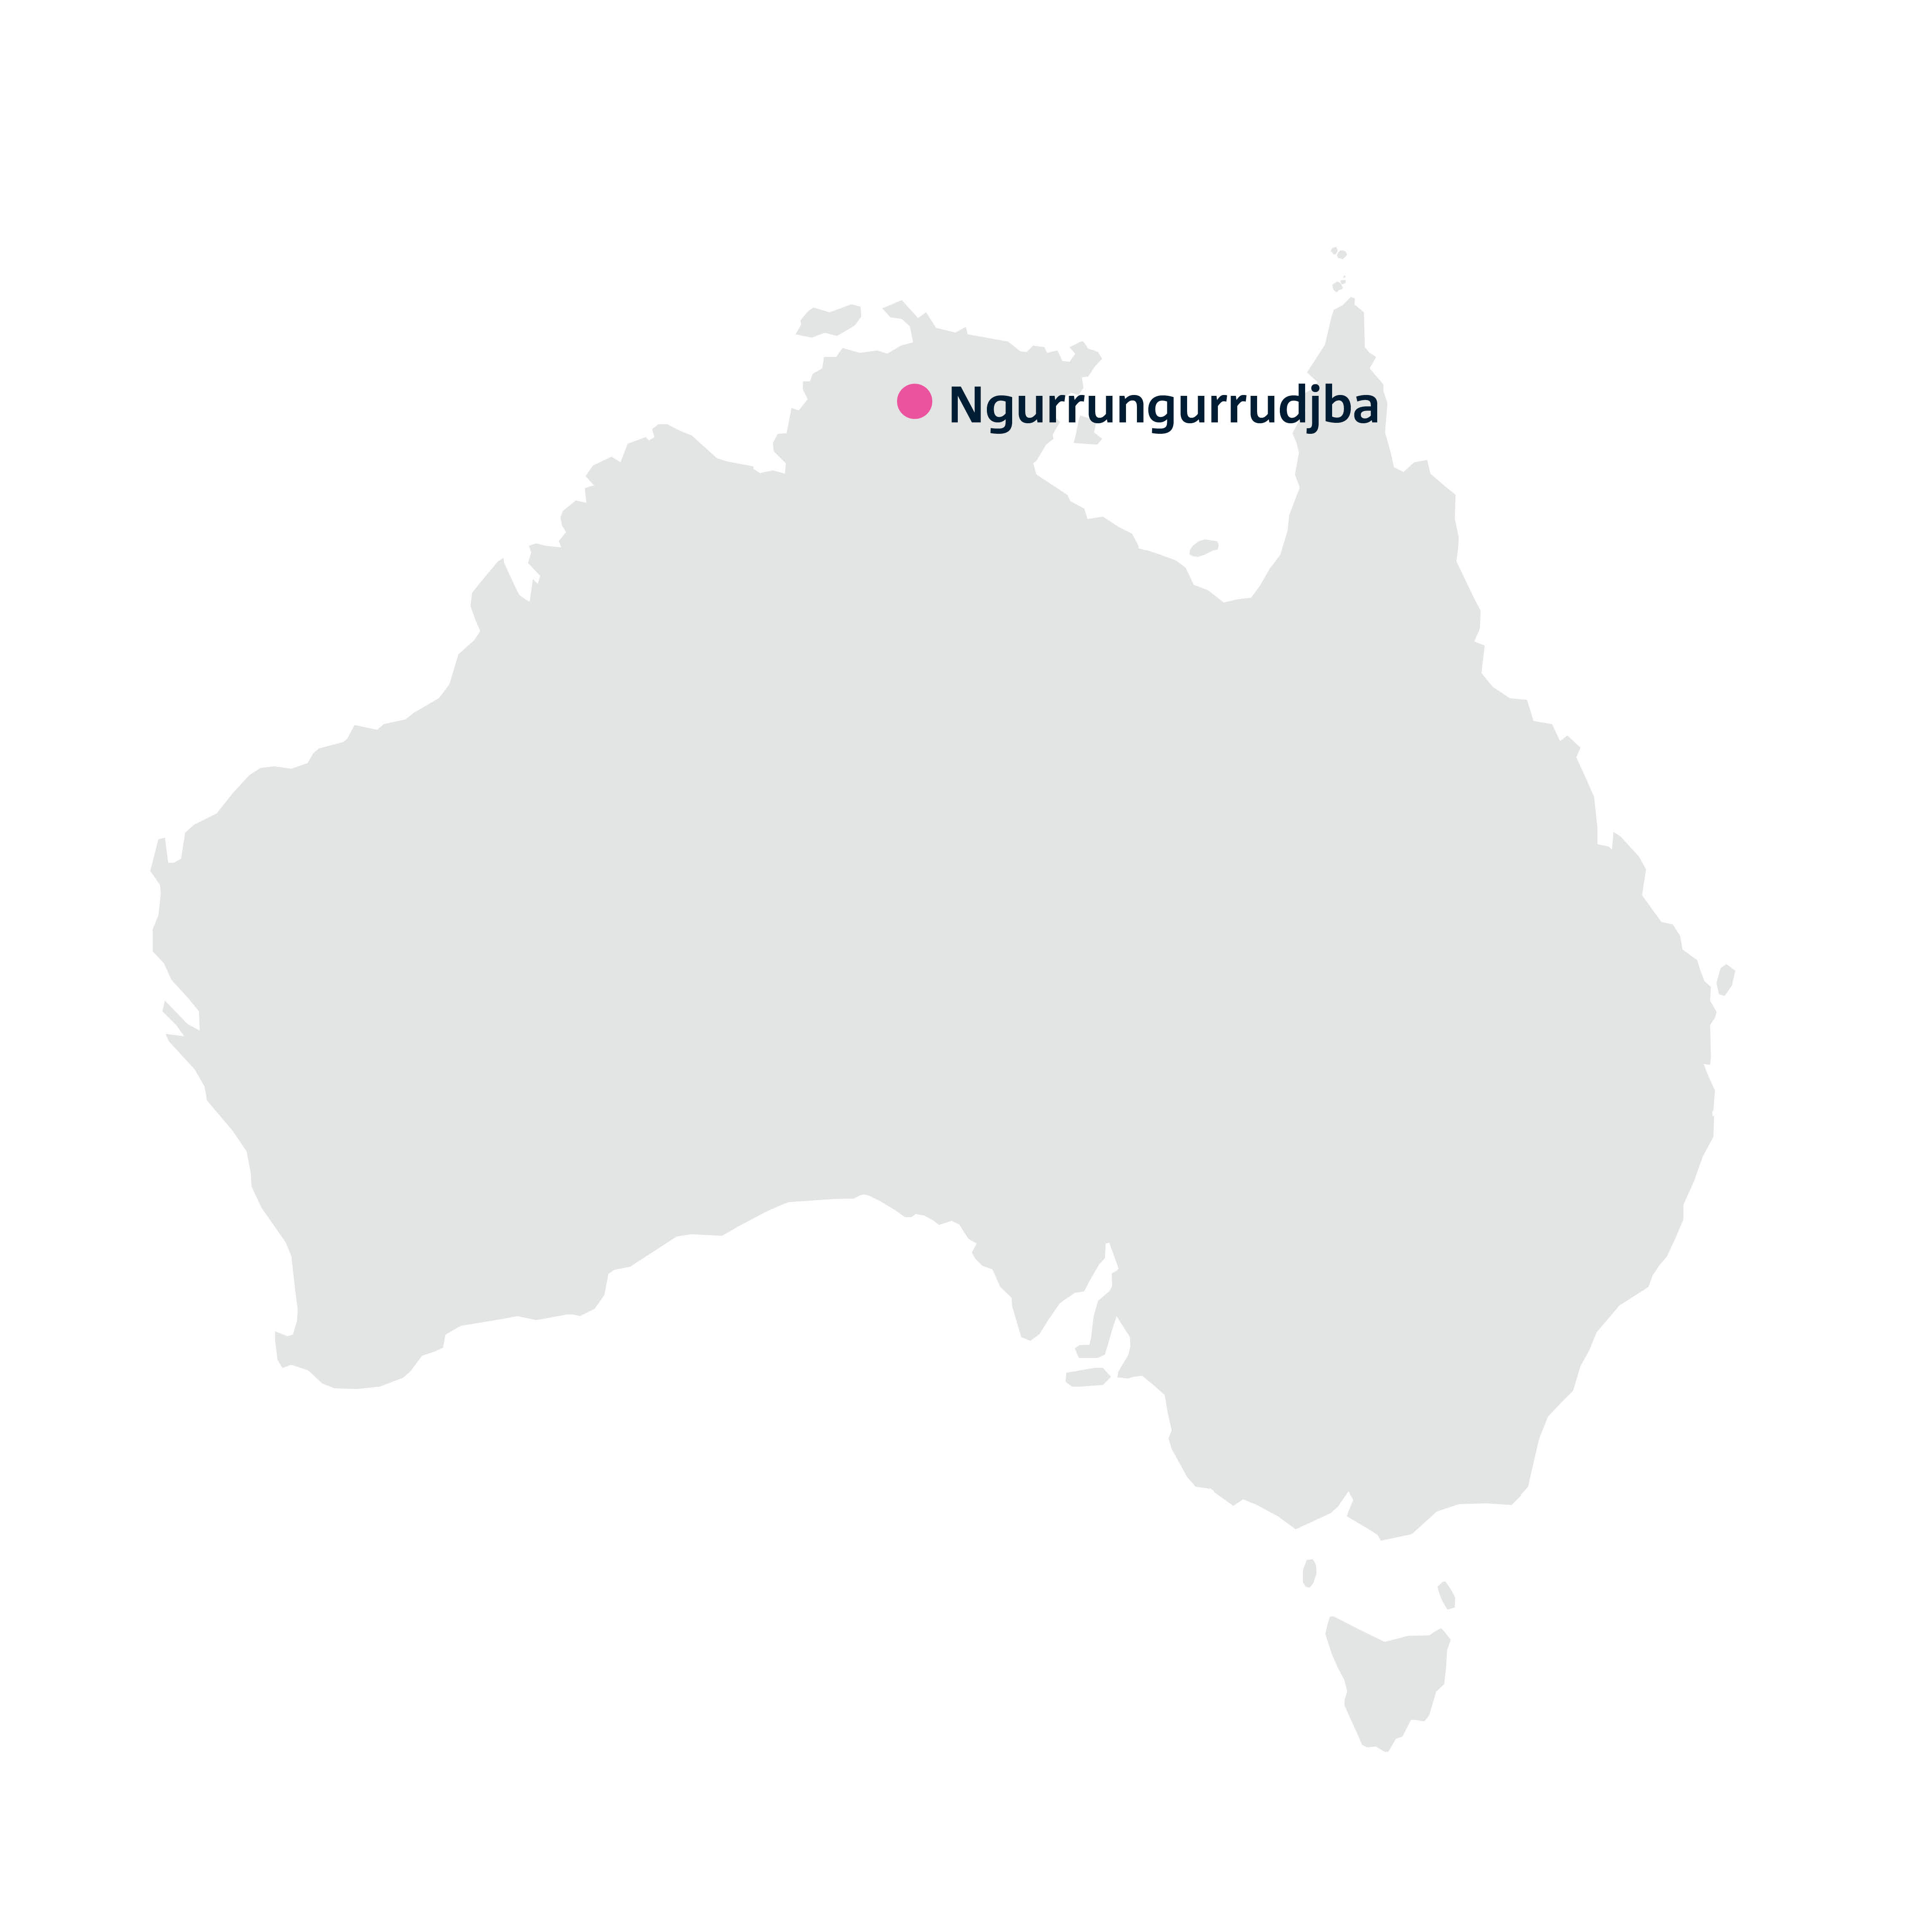 A map of the Australian landmass. In the north of the country is a drop-pin labelled 'Ngurrungurrudjba'.